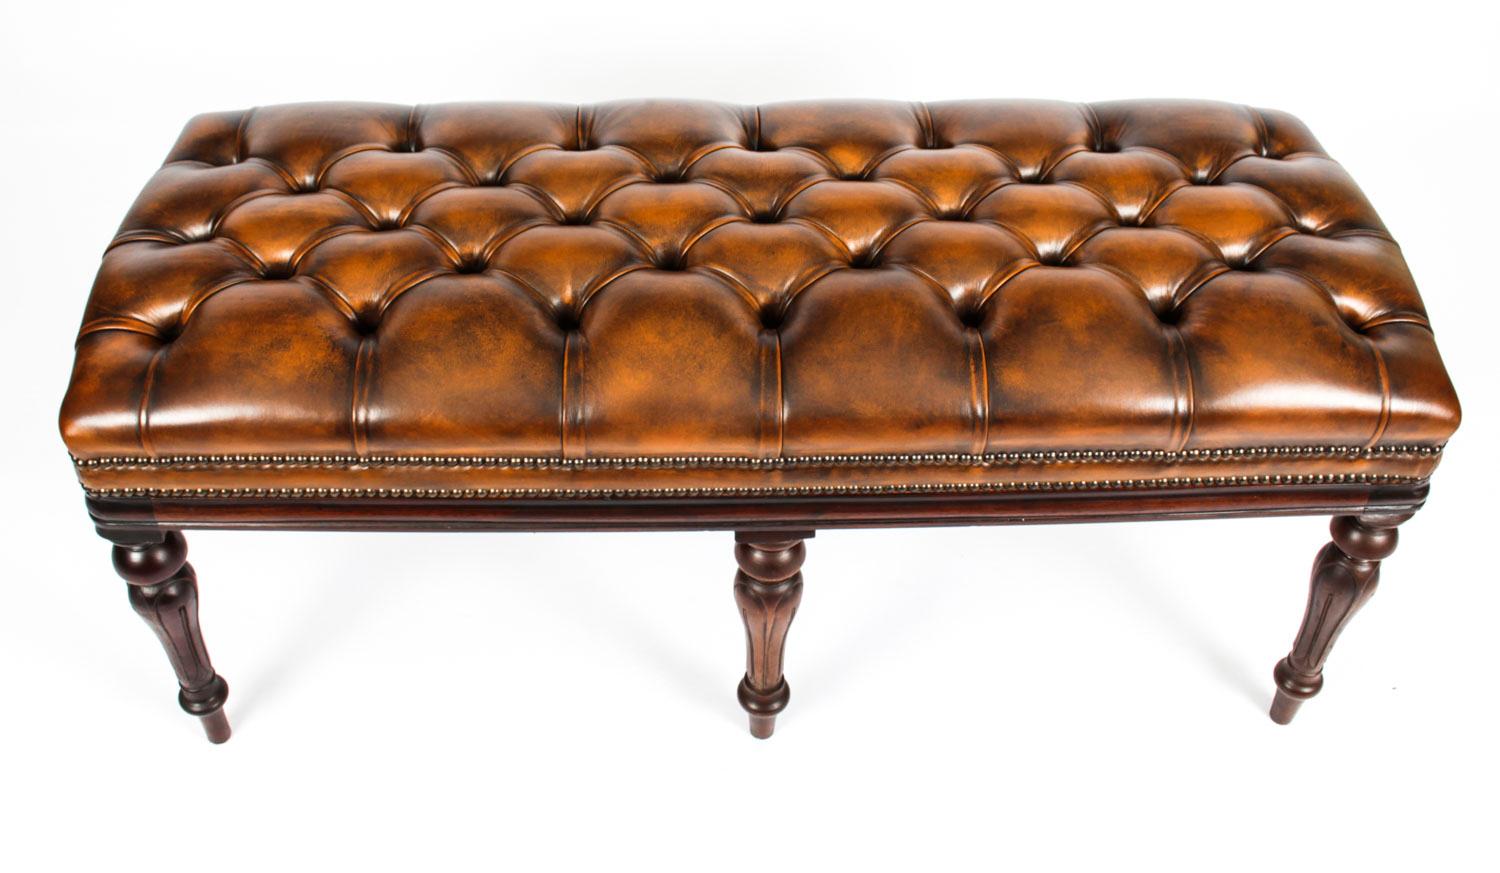 This is a very handsome leather window seat / ottoman, Circa 1890 in date.

It features a fantastic mahogany frame with turned legs and sumptuous dark tan buttoned leather upholstery.

 Condition:
In excellent condition having been